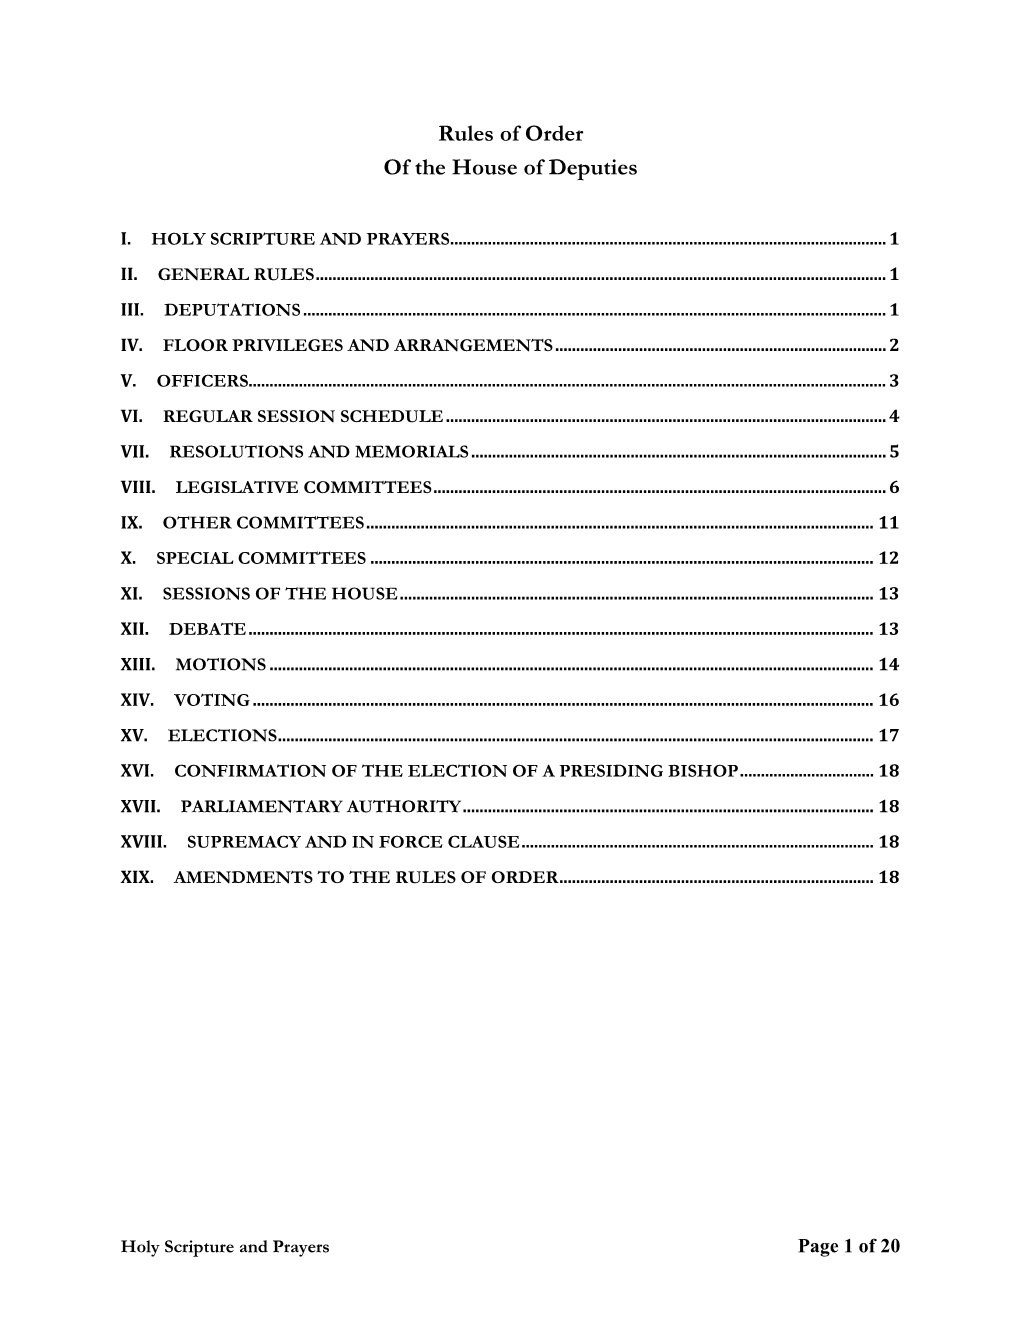 Rules of Order of the House of Deputies